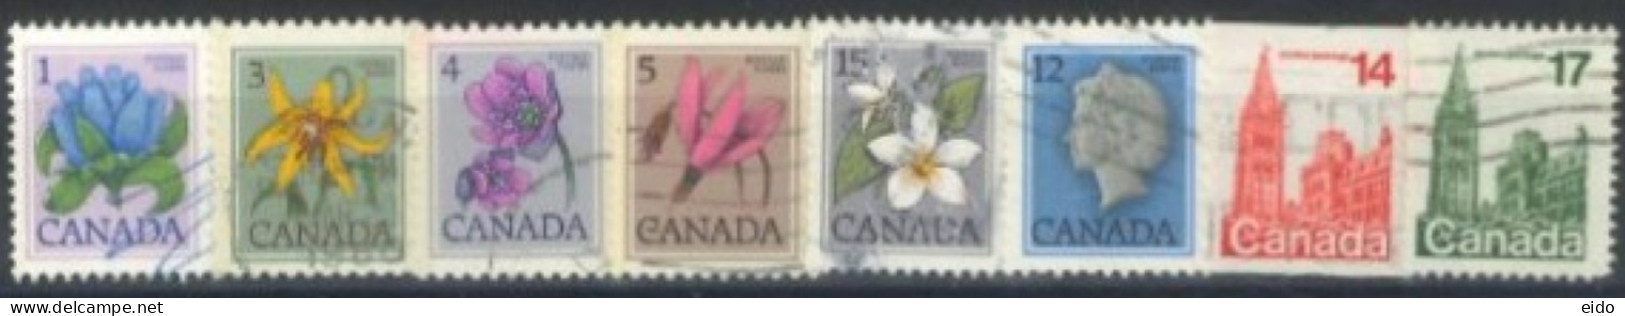 CANADA - 1977, QUEEN ELIZABETH II, HOUSE OF PARLIAMENT, FLOWERS STAMPS SET OF 8, USED. - Used Stamps